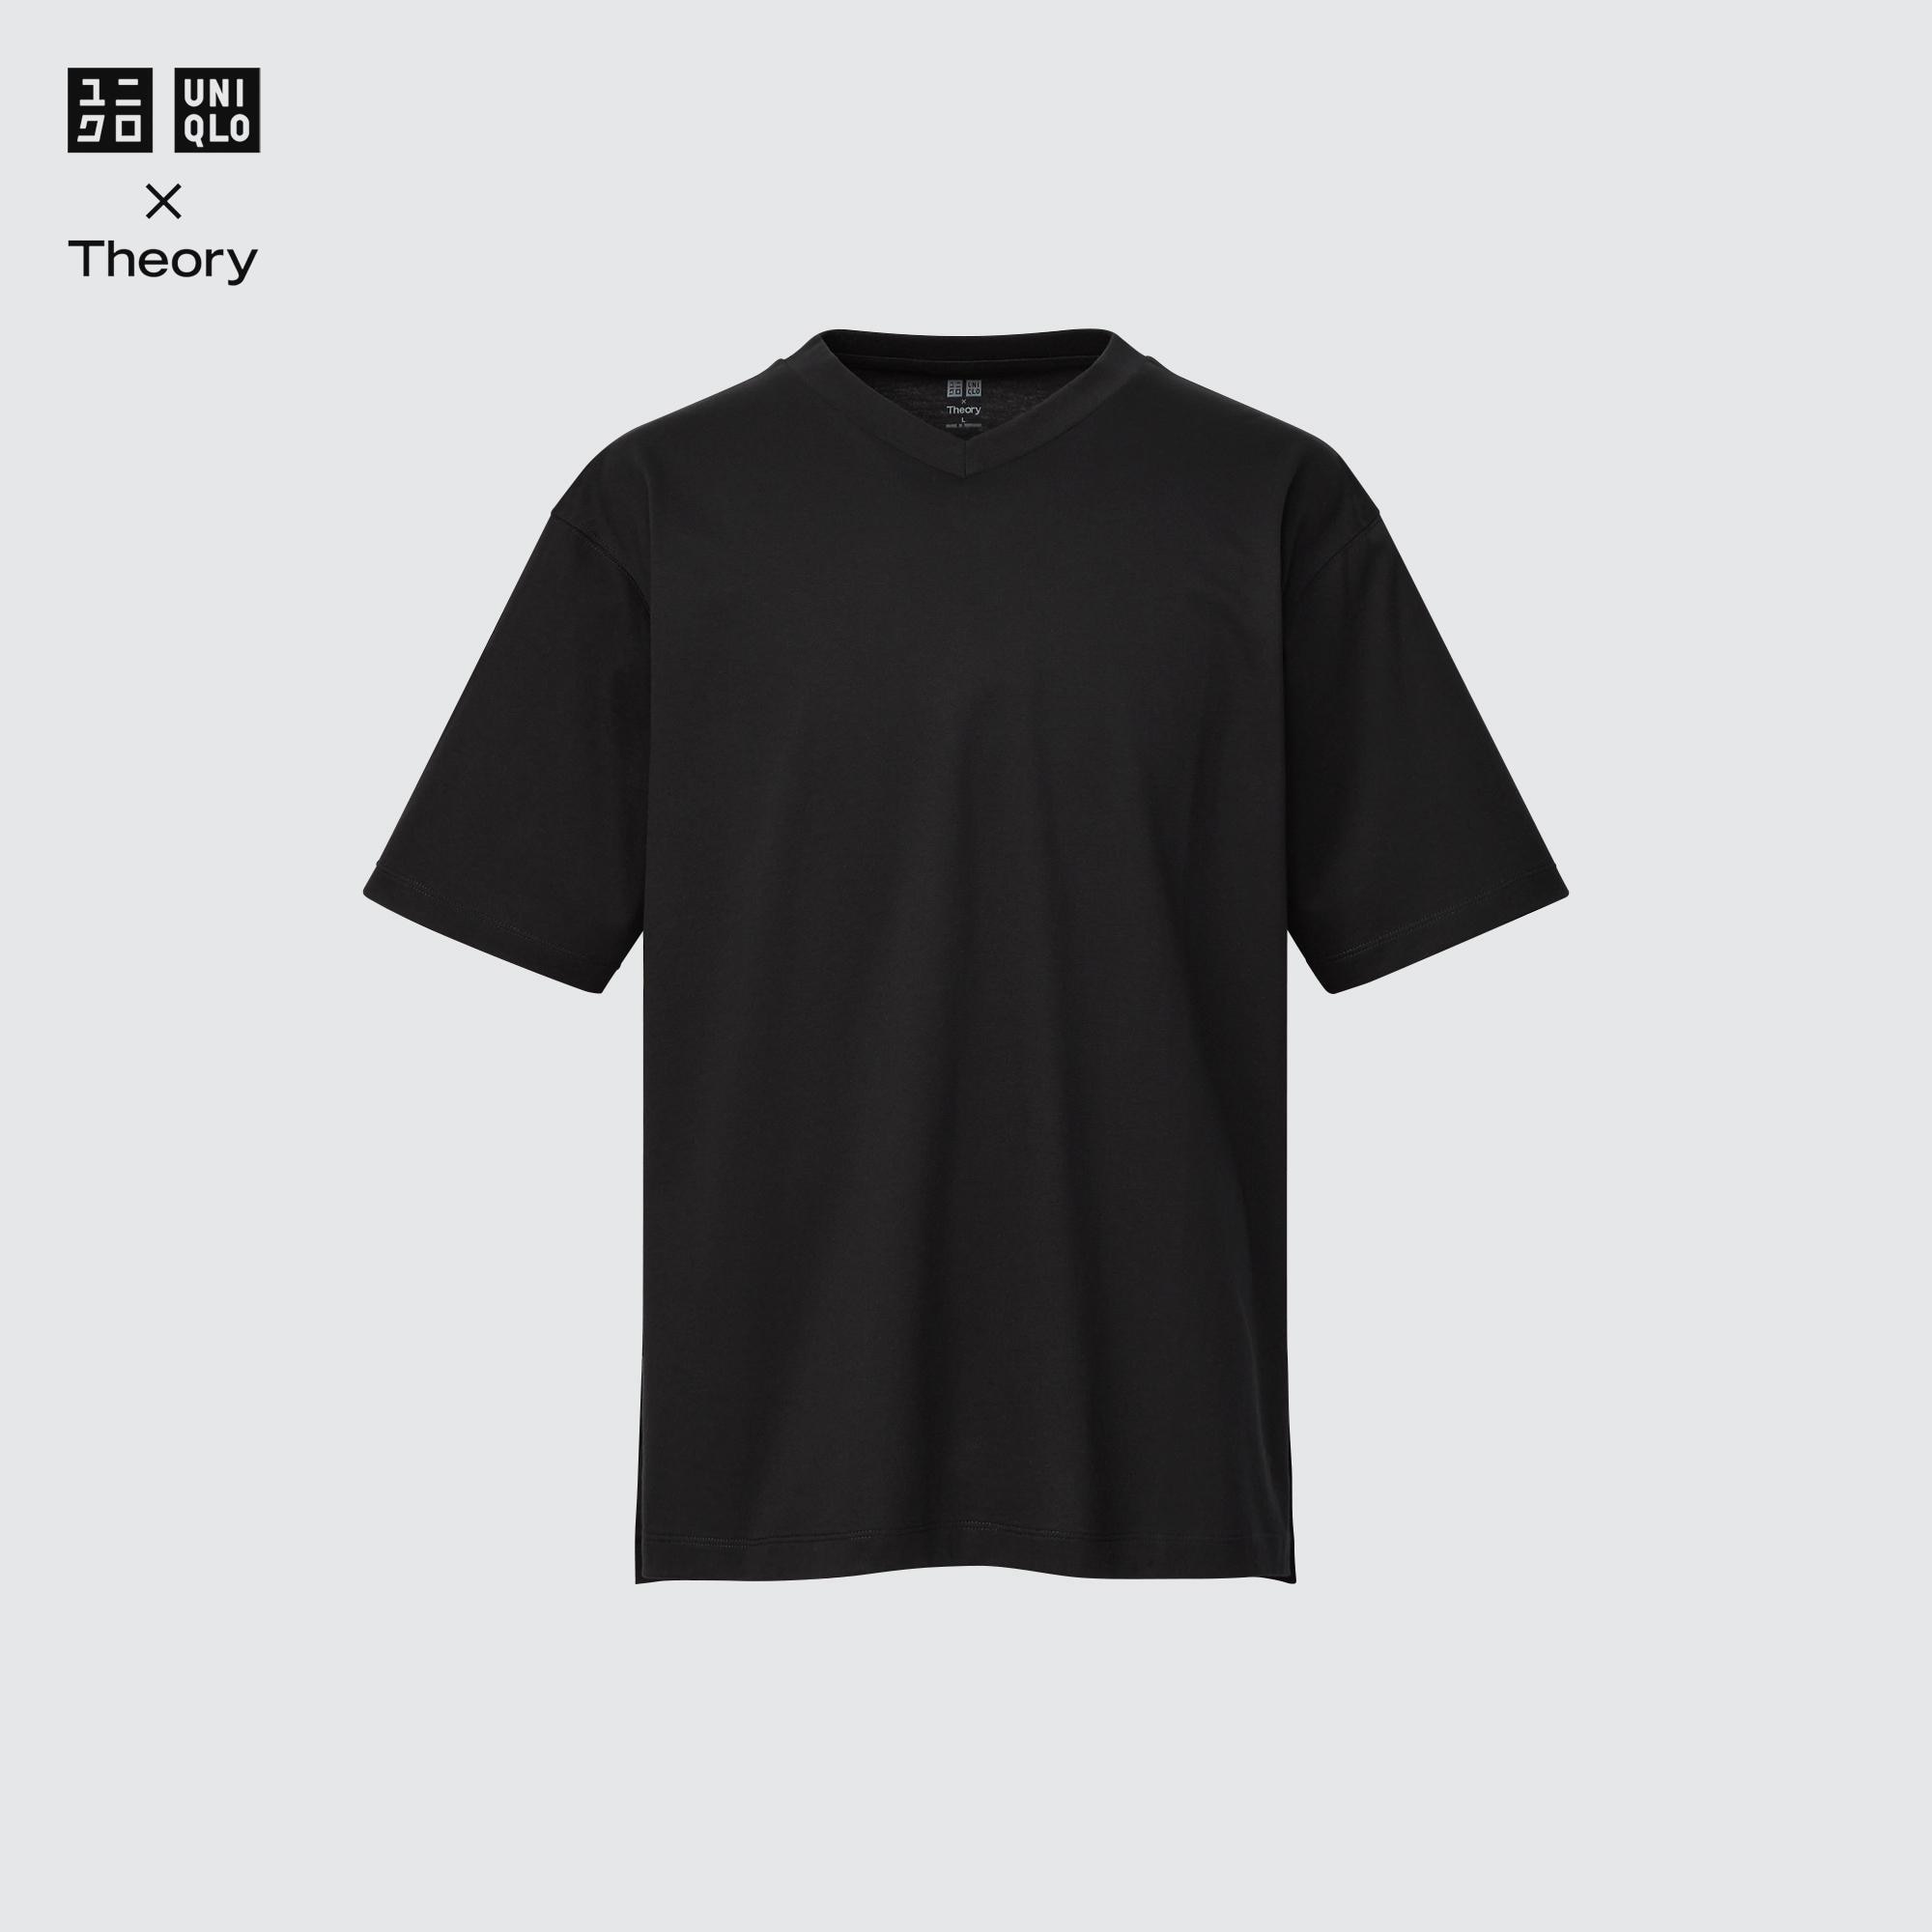 Relaxed Fit V-Neck Short-Sleeve T-Shirt (Theory)